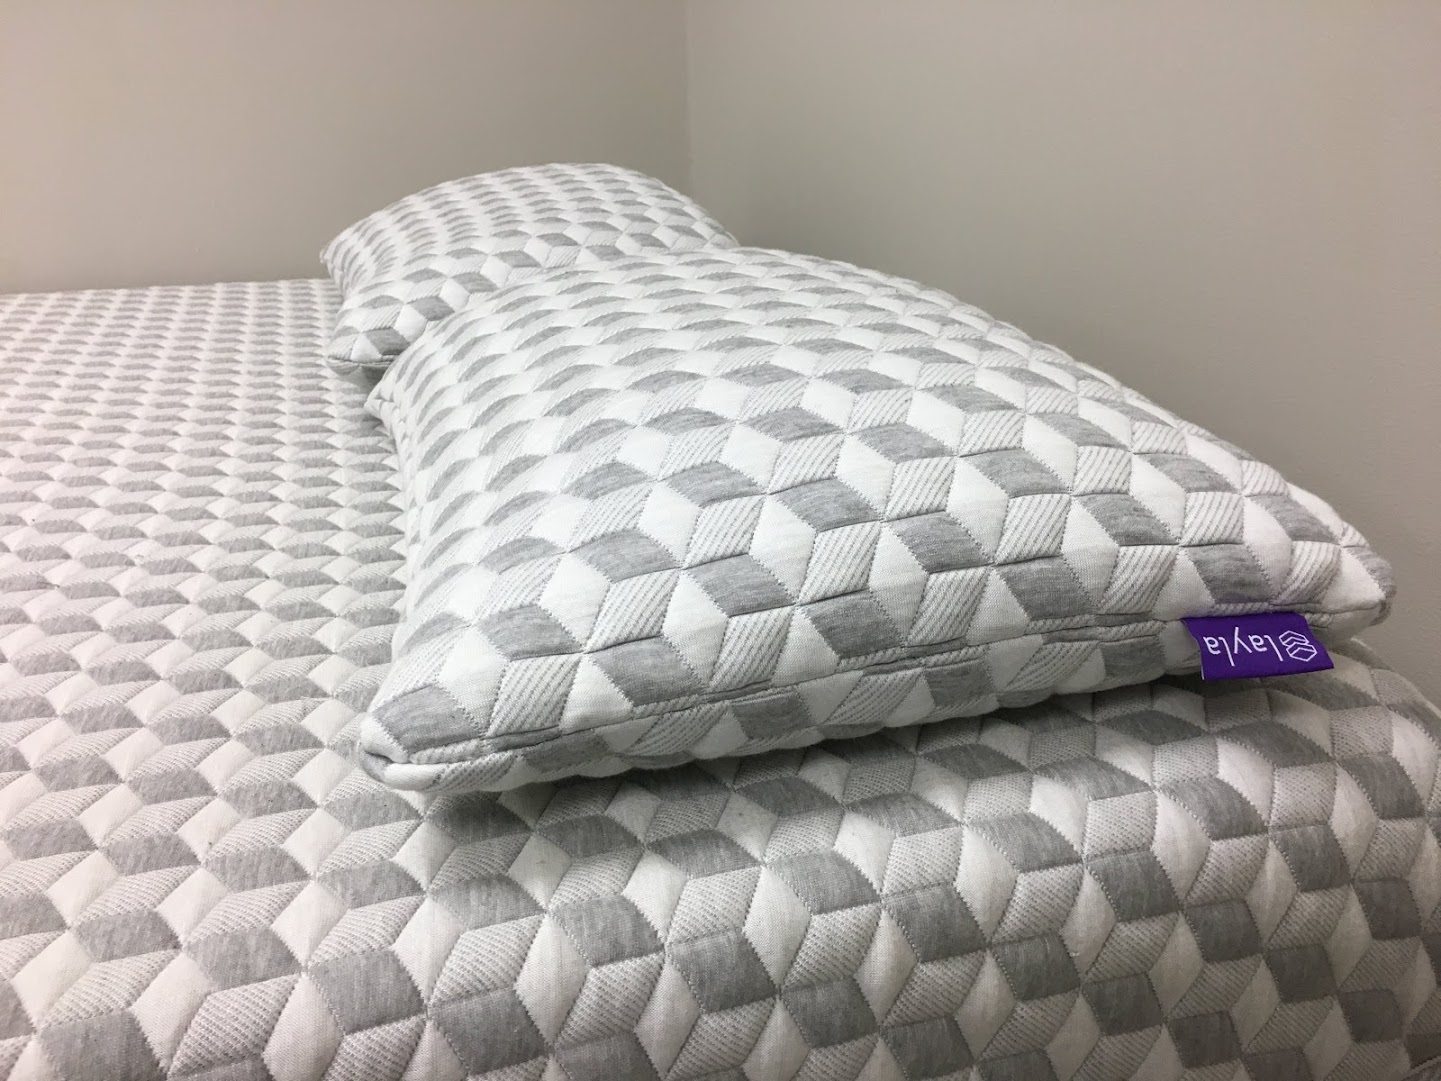 Restful Support: Layla Kapok Pillow Review